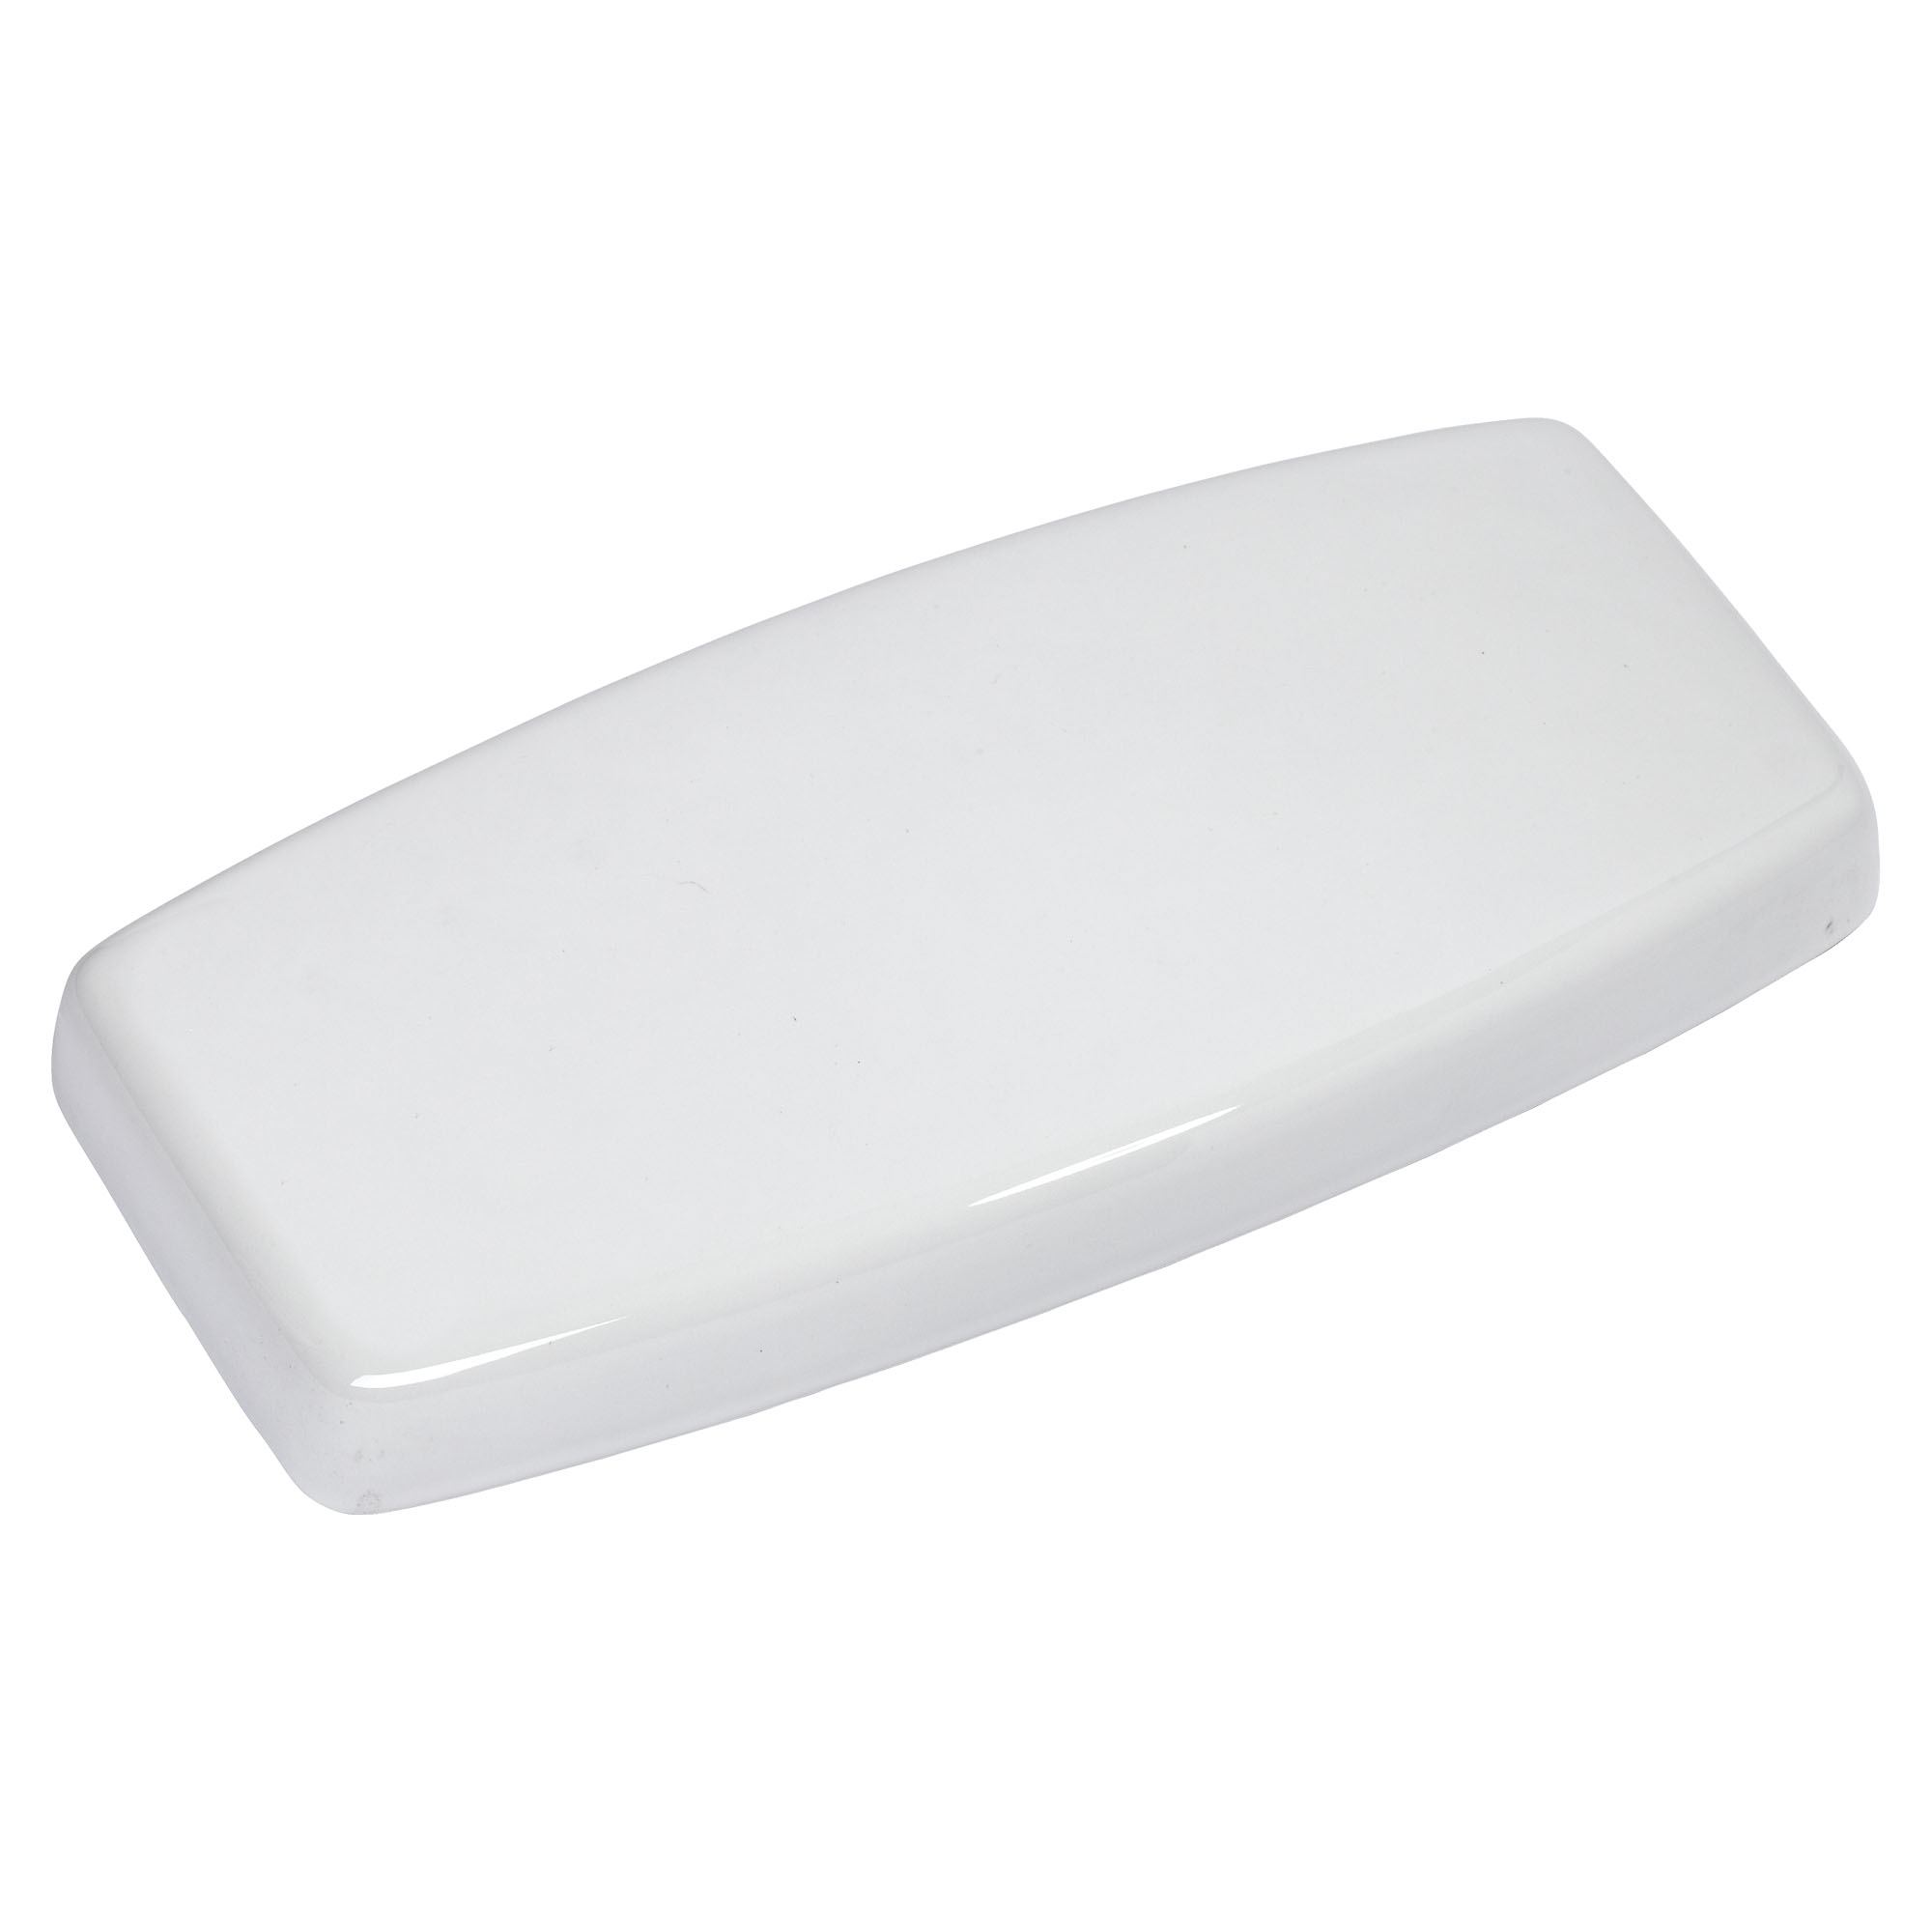 Lowell® Toilet Tank Cover